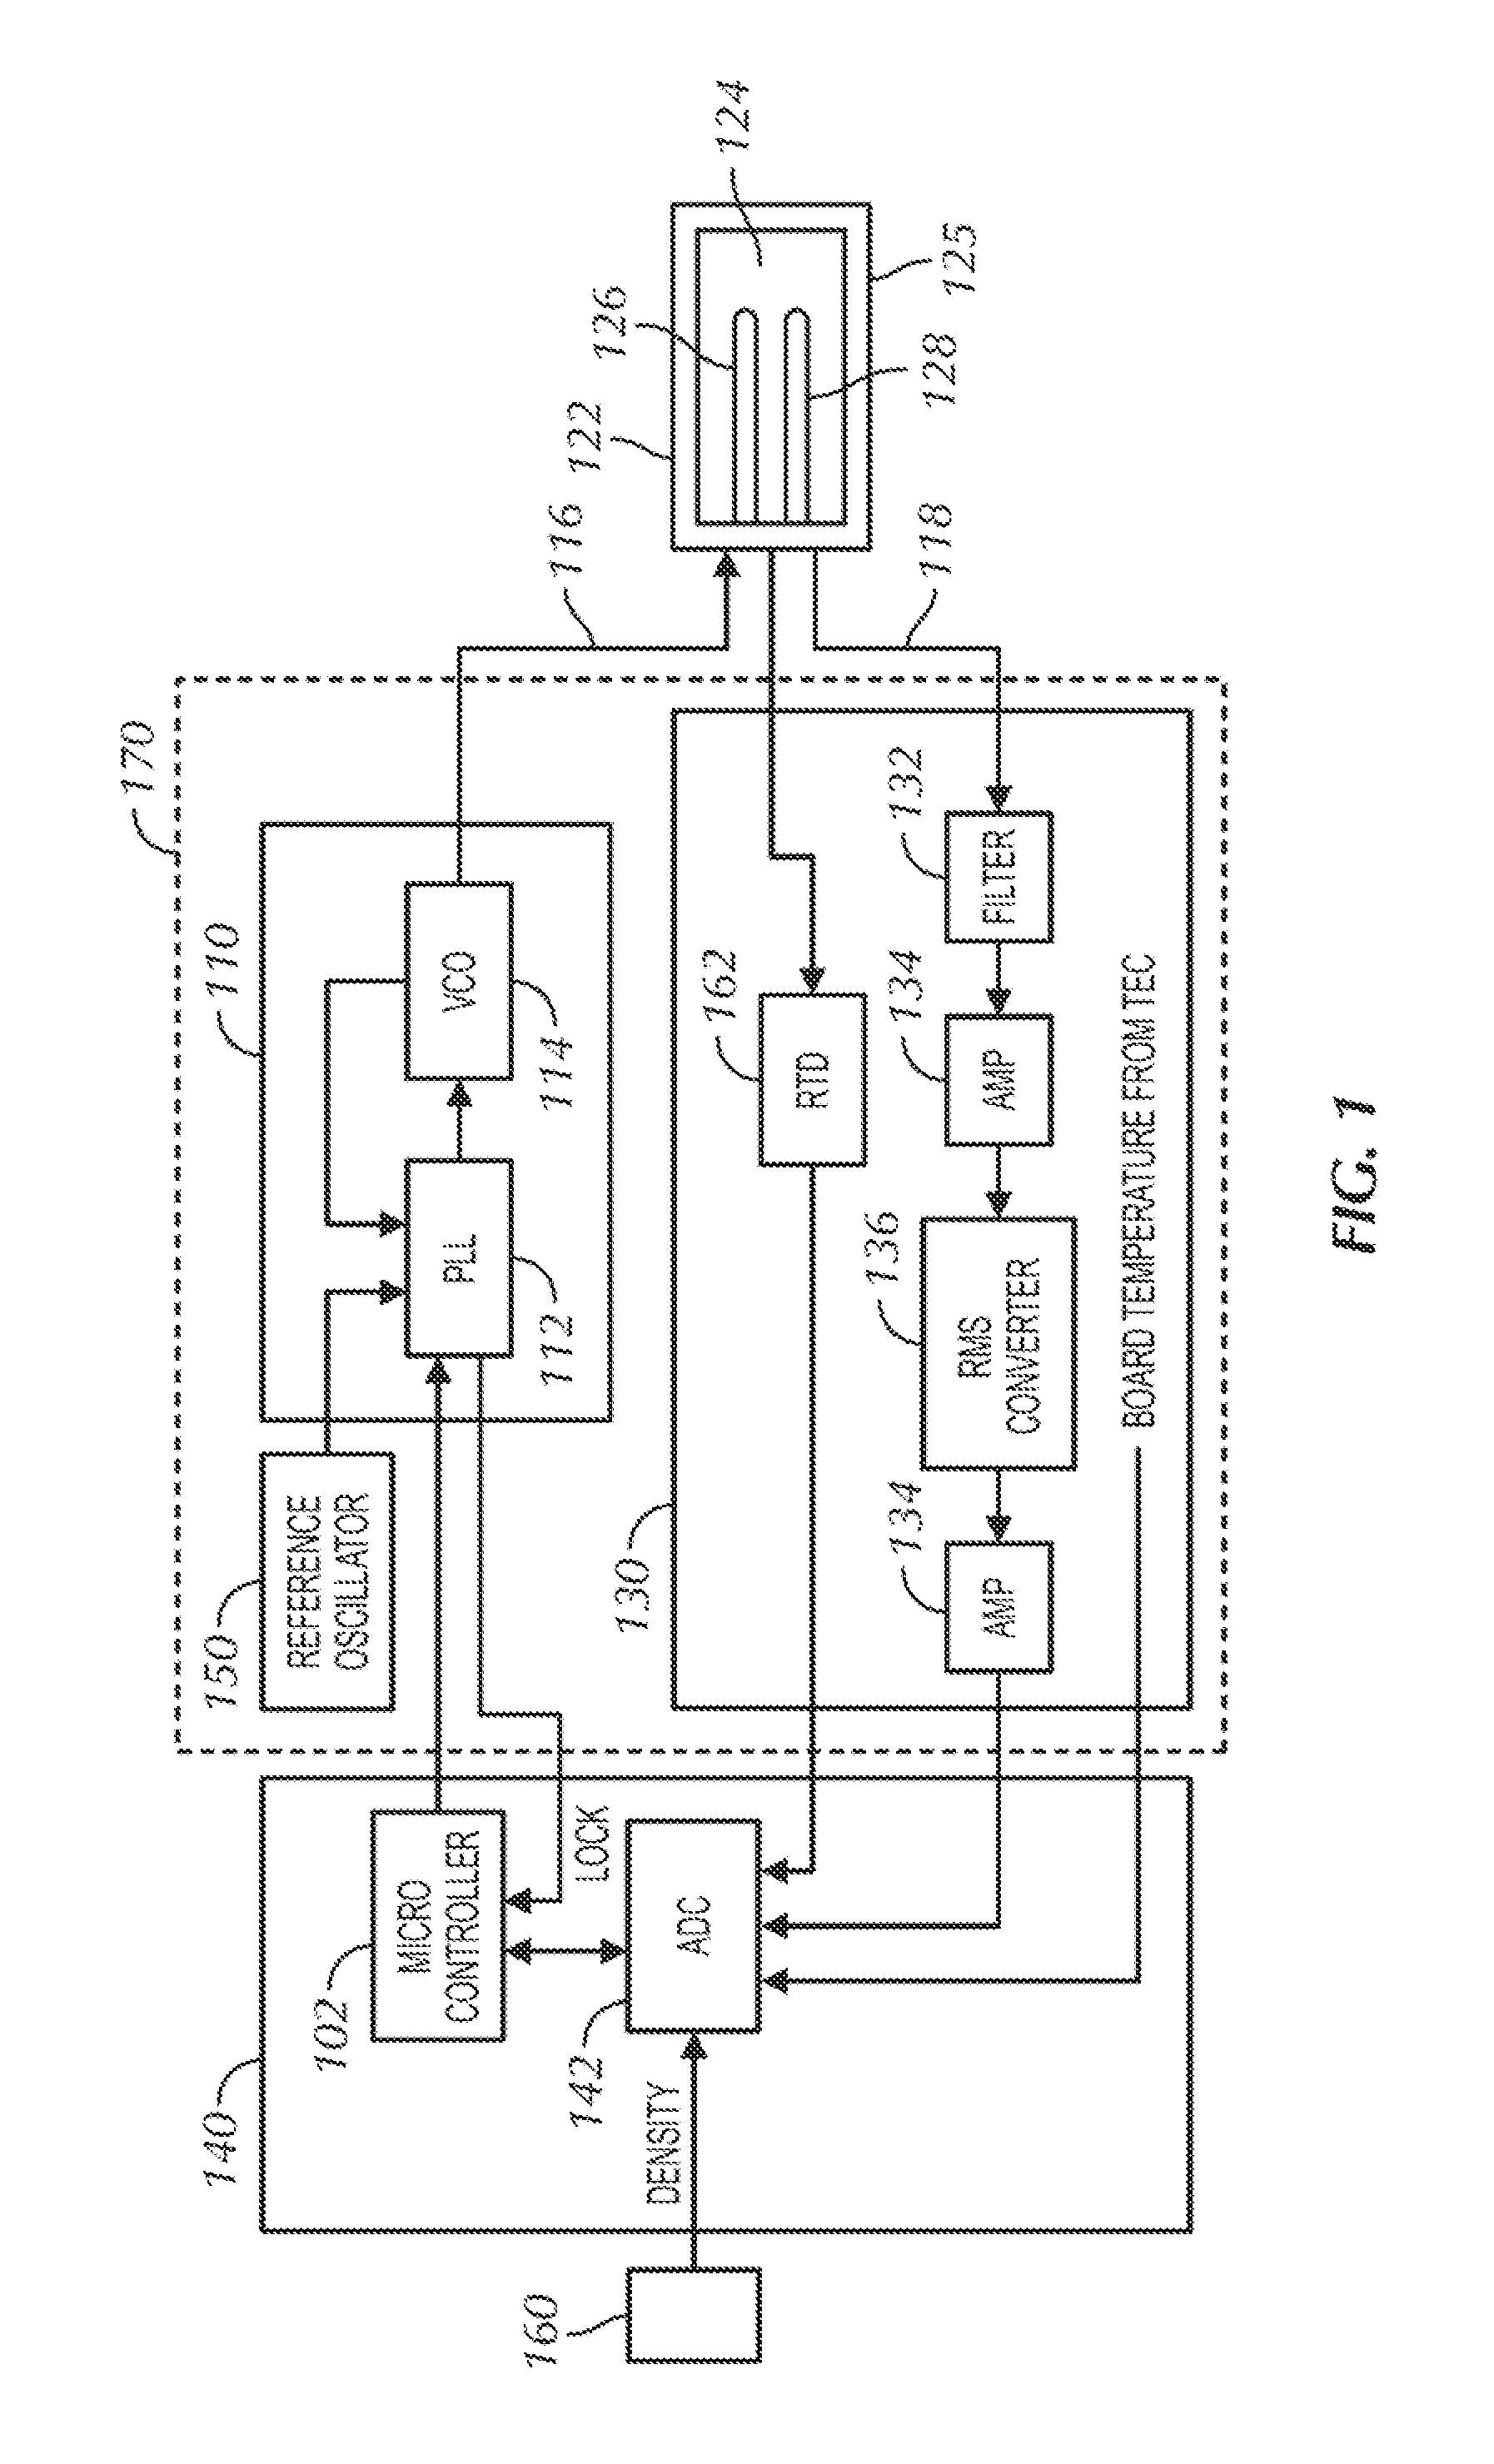 Method and Apparatus for Determining the Water Concentration in a Fluid Mixture